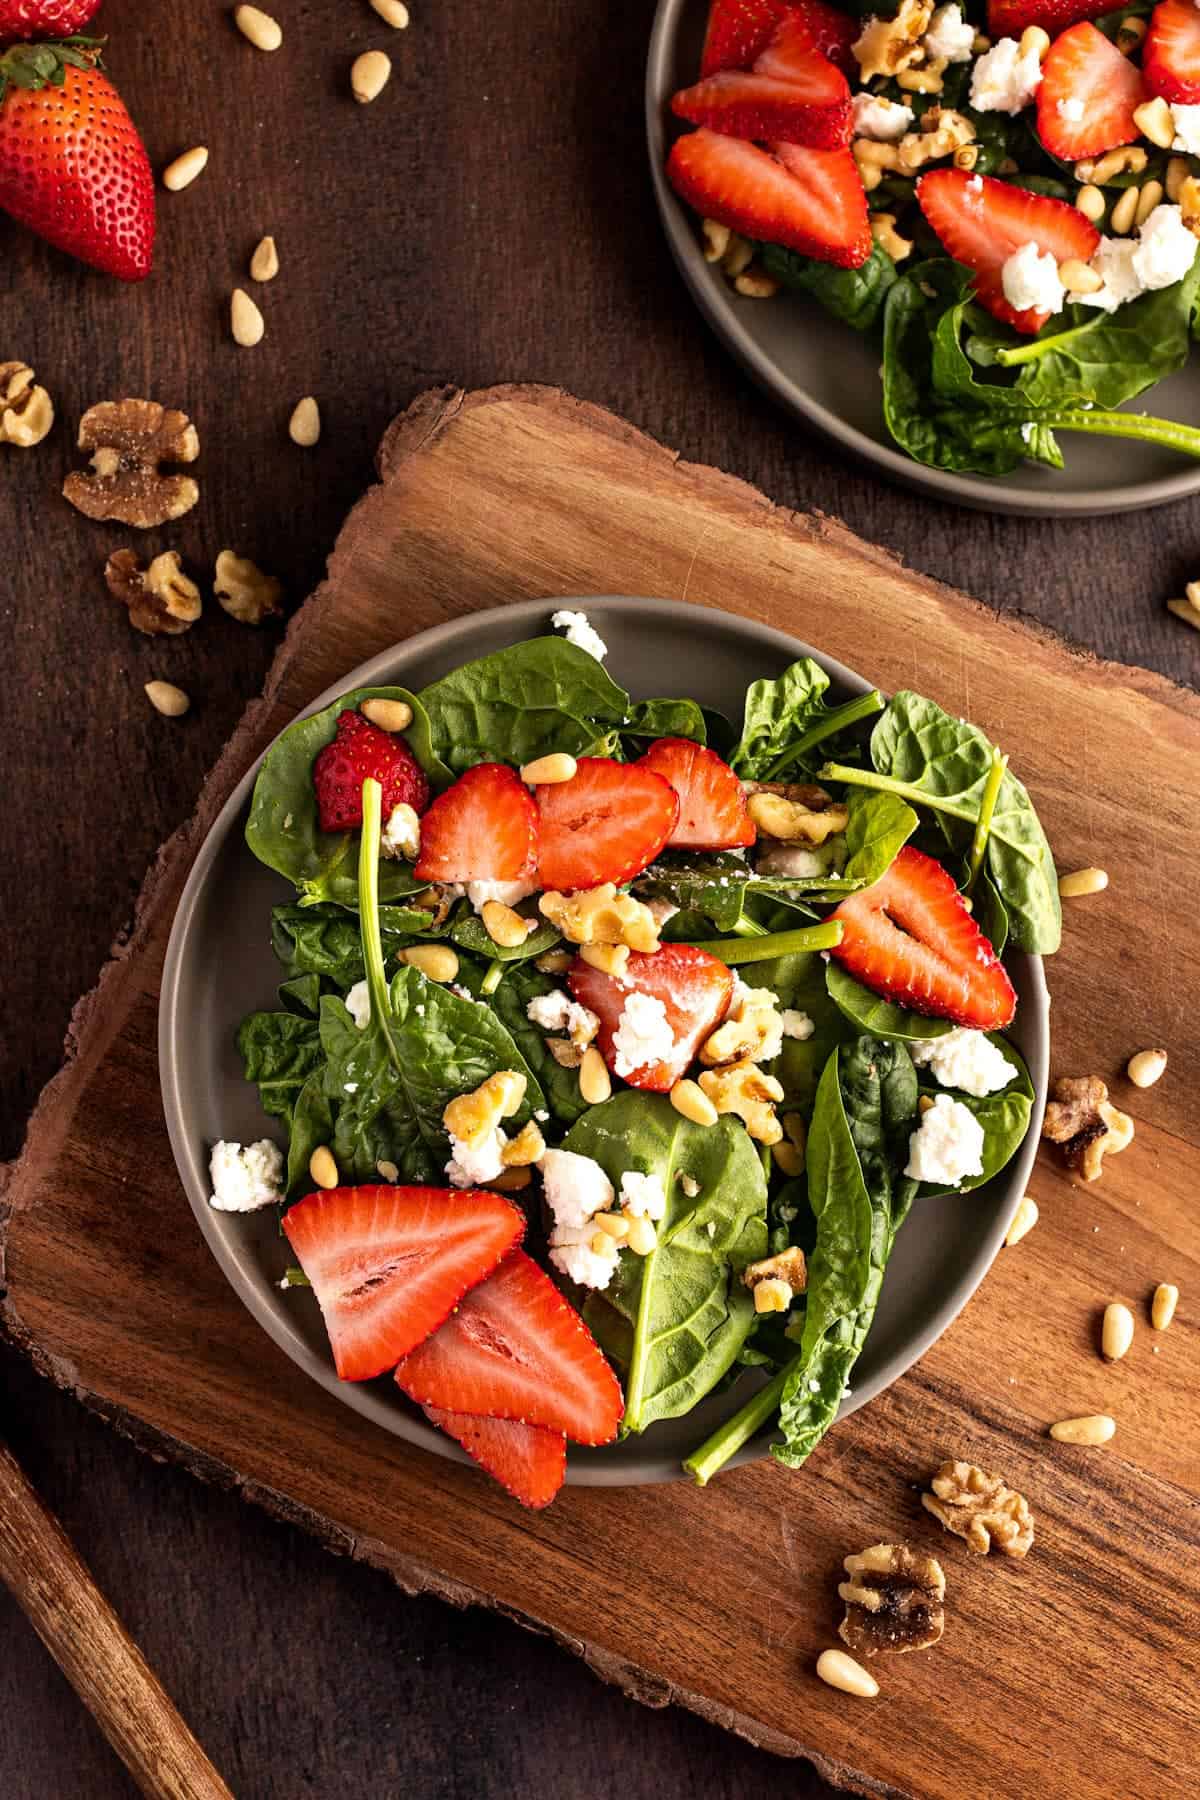 Strawberry goat cheese salad with pine nuts and walnuts garnished on top.